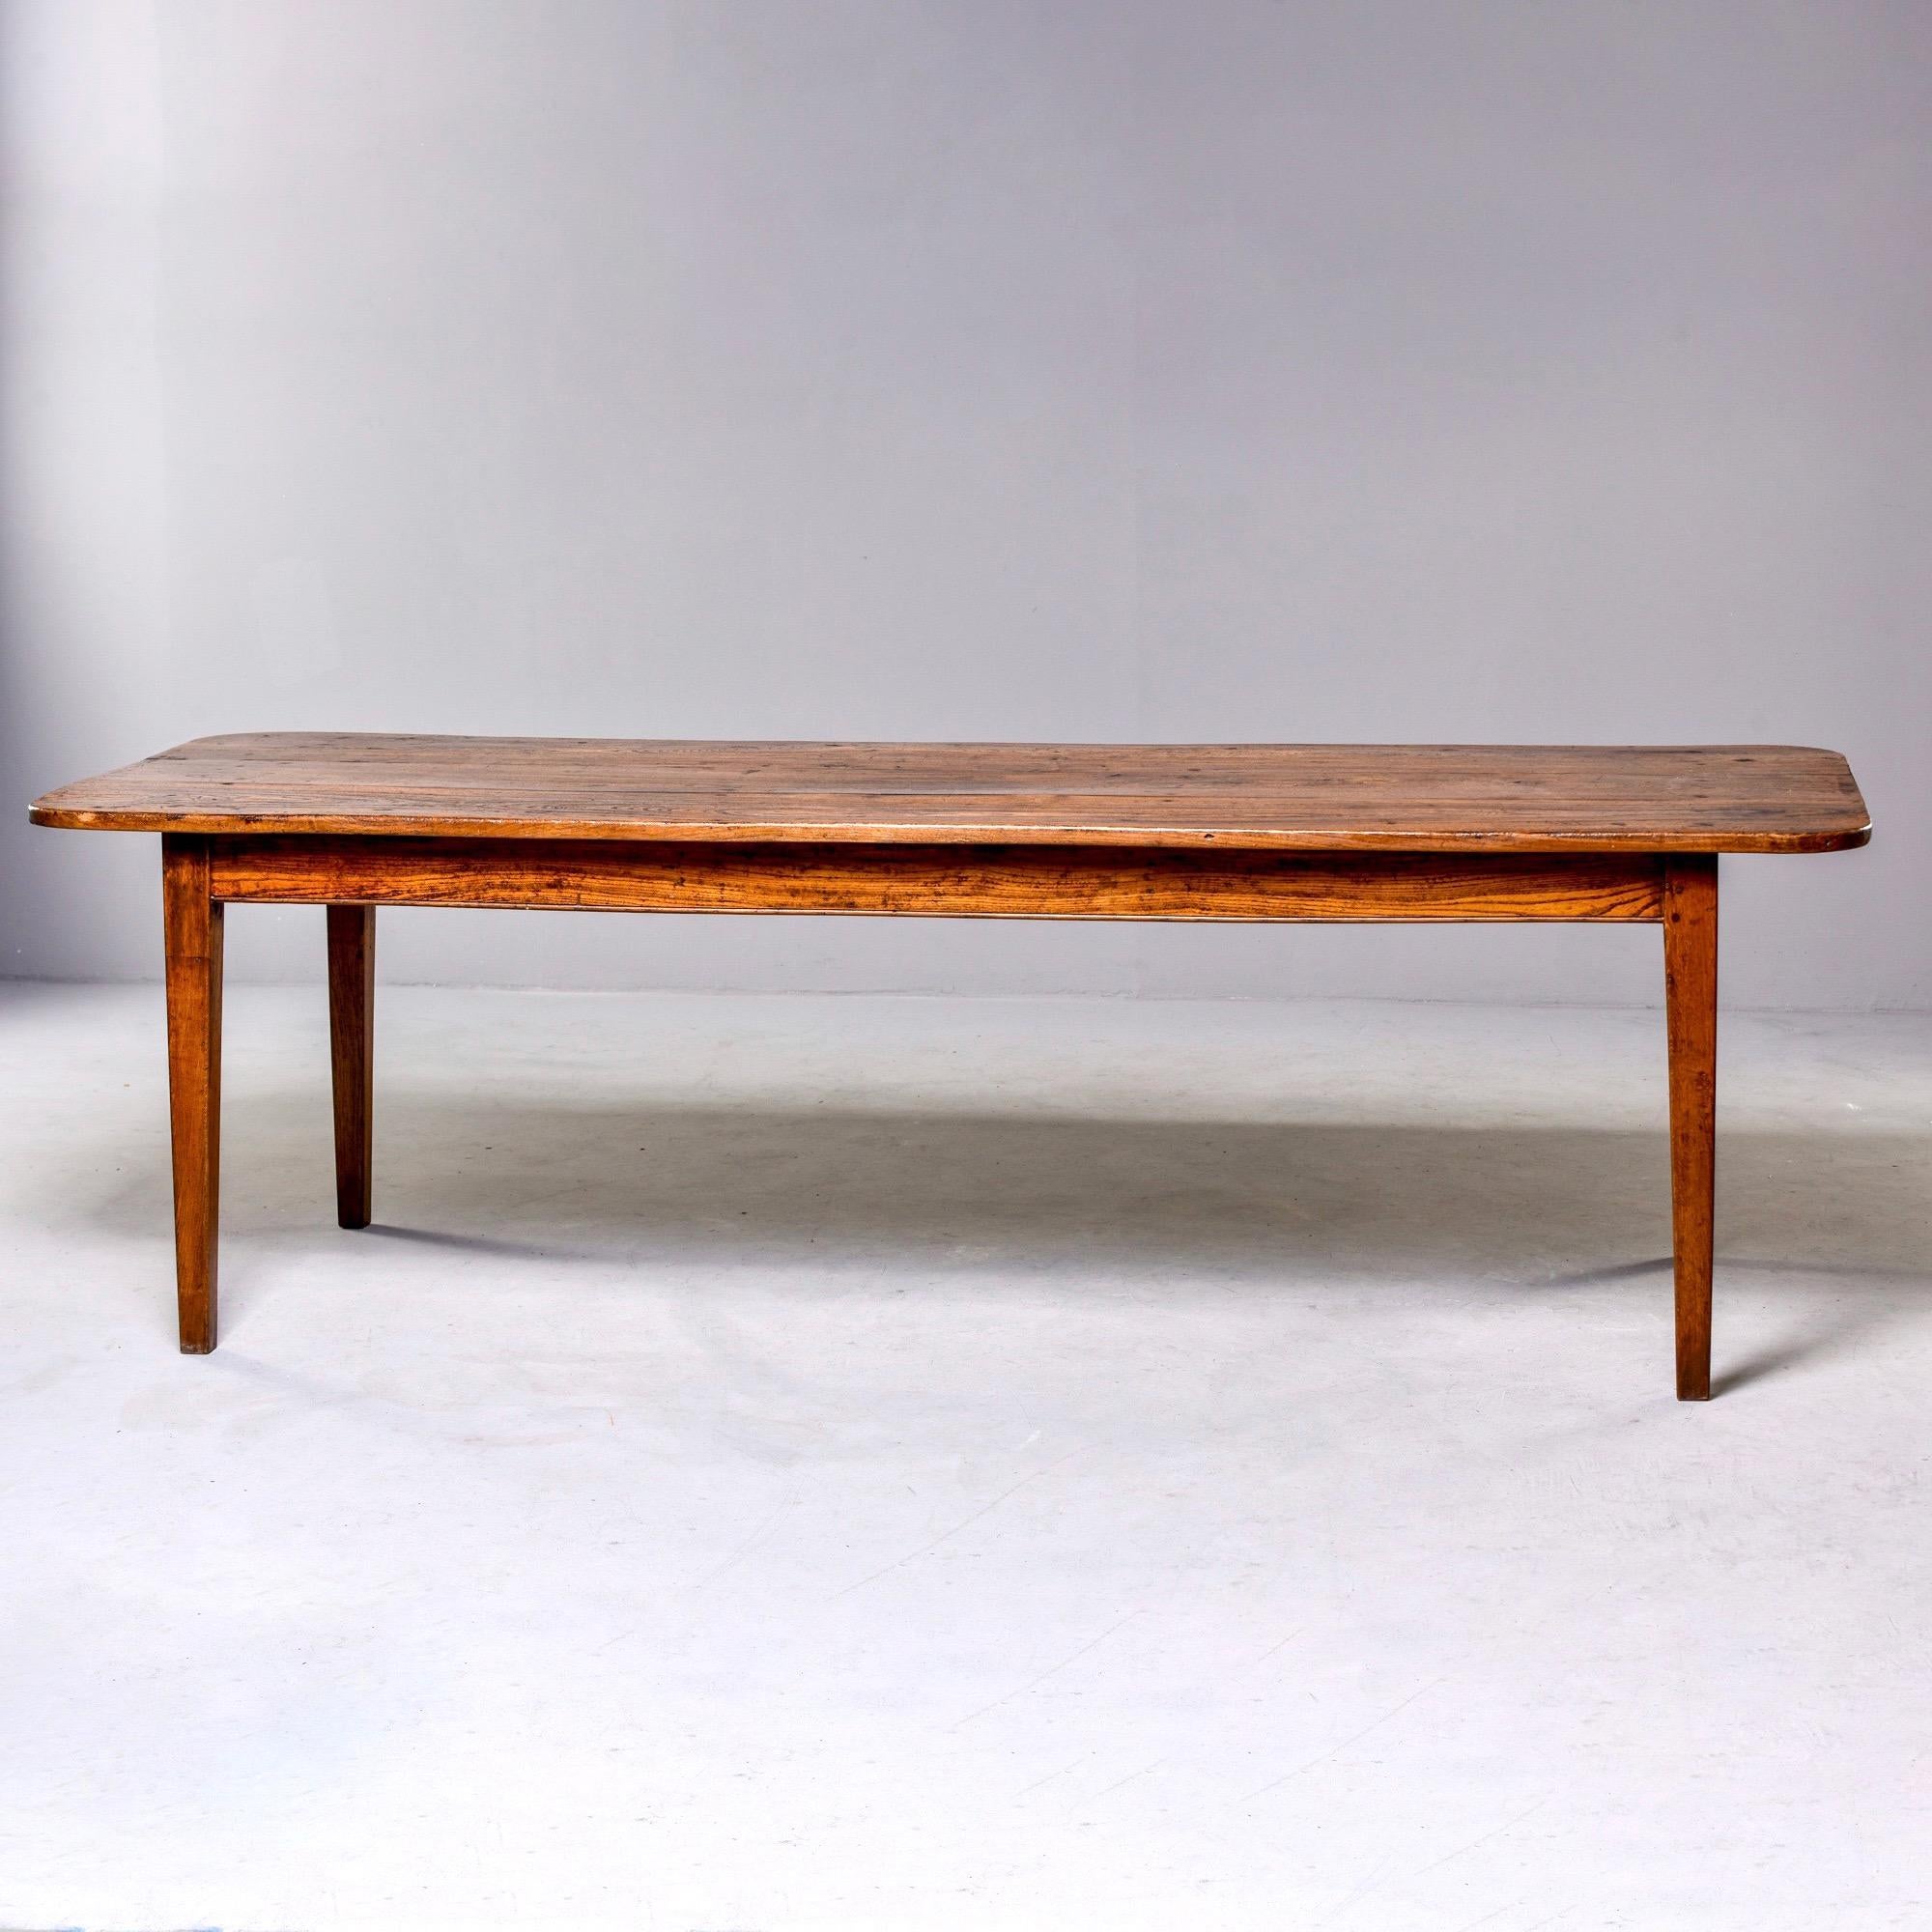 Long elm table with authentic wear and patina to wood, circa 1880s. Super sturdy with single narrow center drawer and rounded corners. Unknown maker.

Measures: End apron height 25”
Side apron height 24.75”.